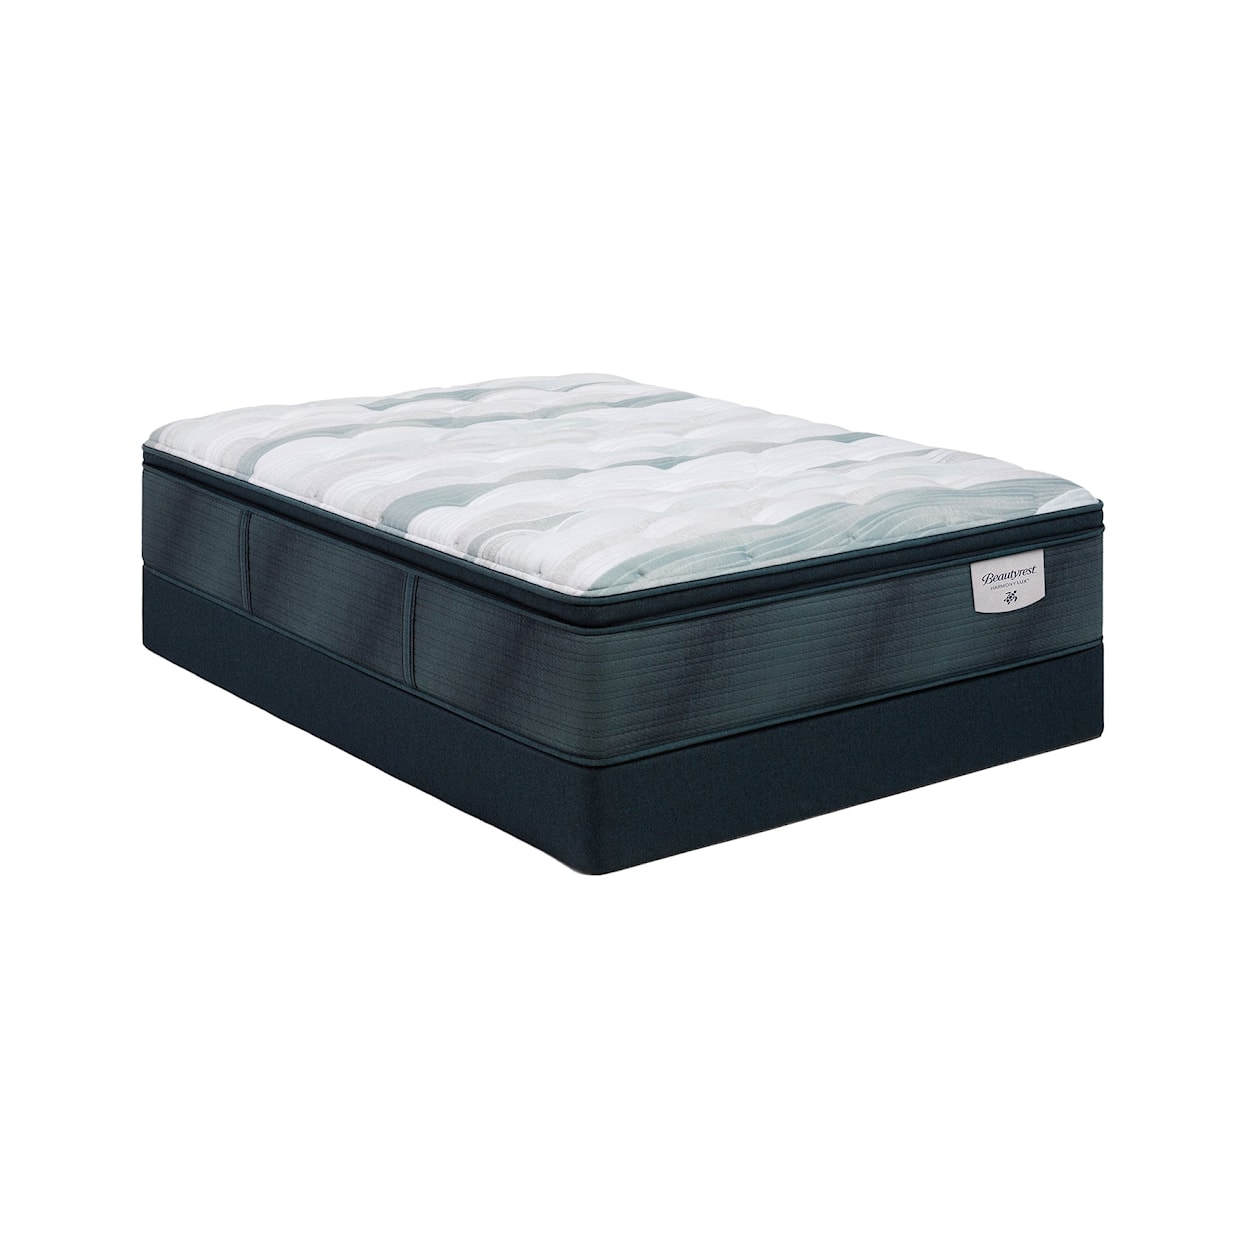 Beautyrest Harmony Lux ANCHOR ISLAND MED PT King Mattress